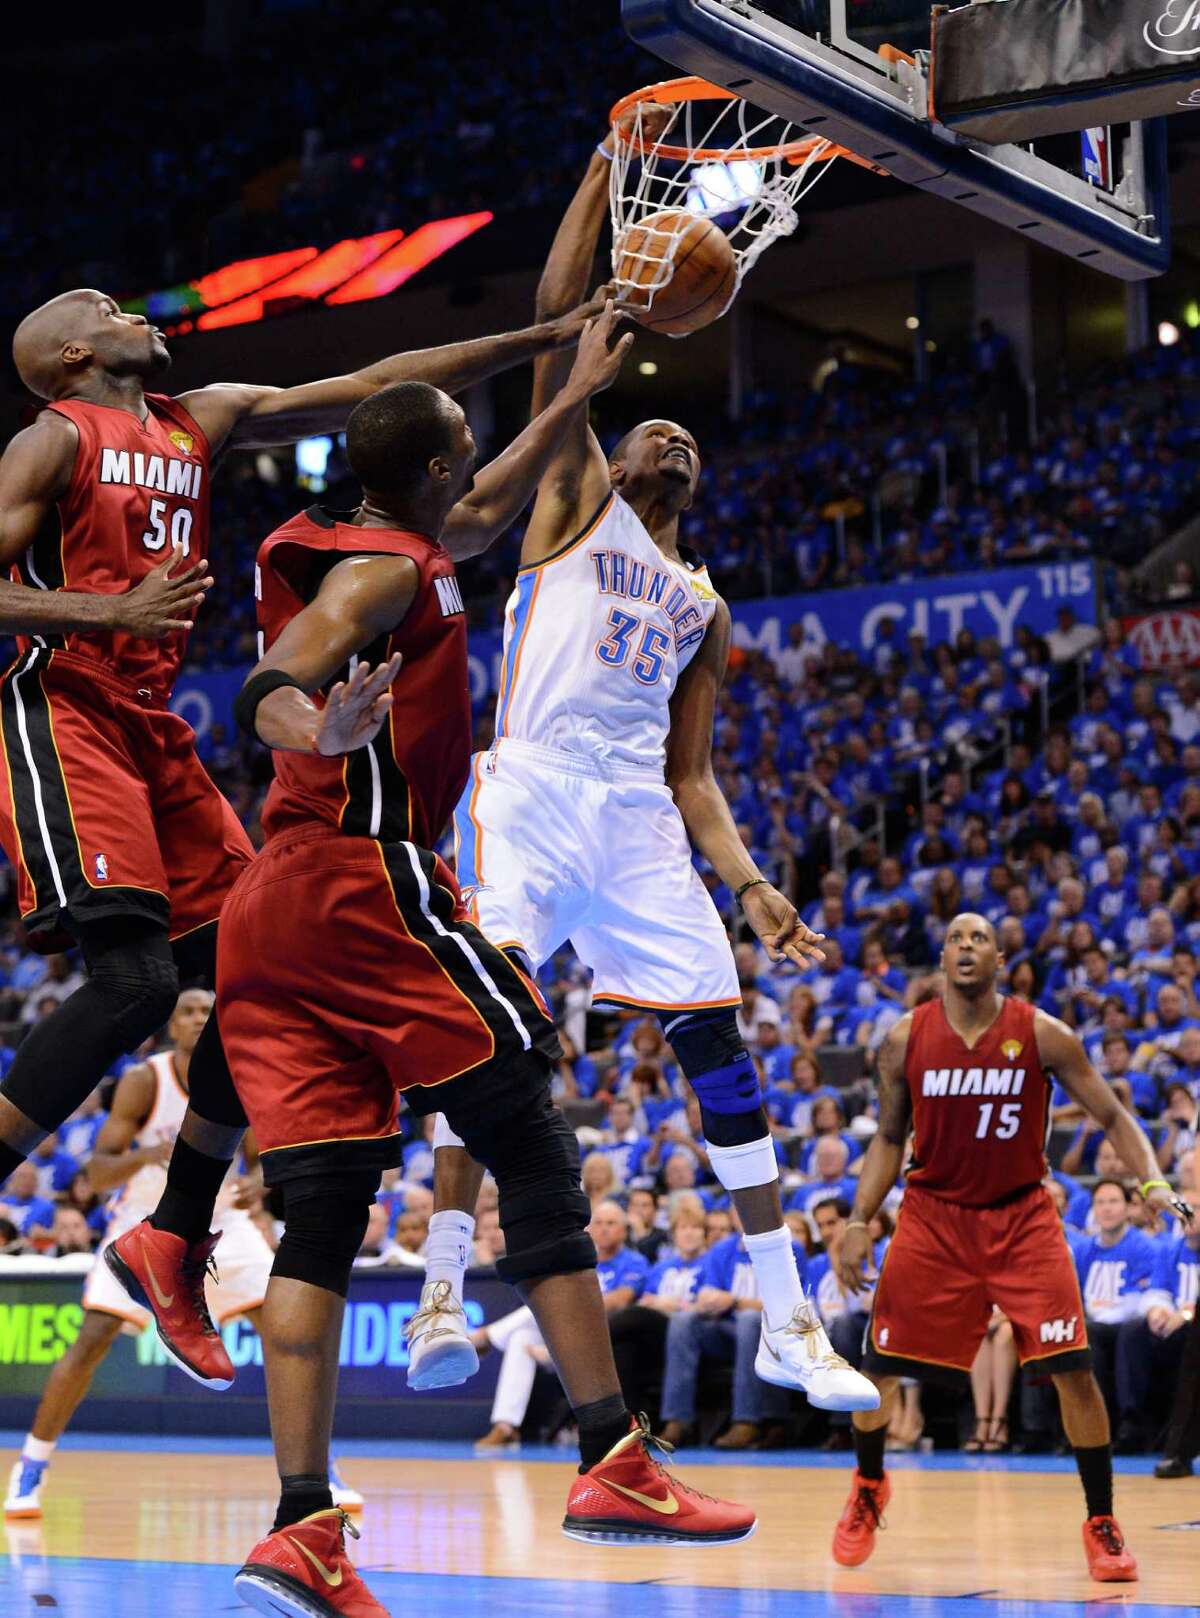 OKLAHOMA CITY, OK - JUNE 12: Kevin Durant #35 of the Oklahoma City Thunder dunks the ball over Joel Anthony #50 and Chris Bosh #1 of the Miami Heat in the second quarter in Game One of the 2012 NBA Finals at Chesapeake Energy Arena on June 12, 2012 in Oklahoma City, Oklahoma. NOTE TO USER: User expressly acknowledges and agrees that, by downloading and or using this photograph, User is consenting to the terms and conditions of the Getty Images License Agreement.